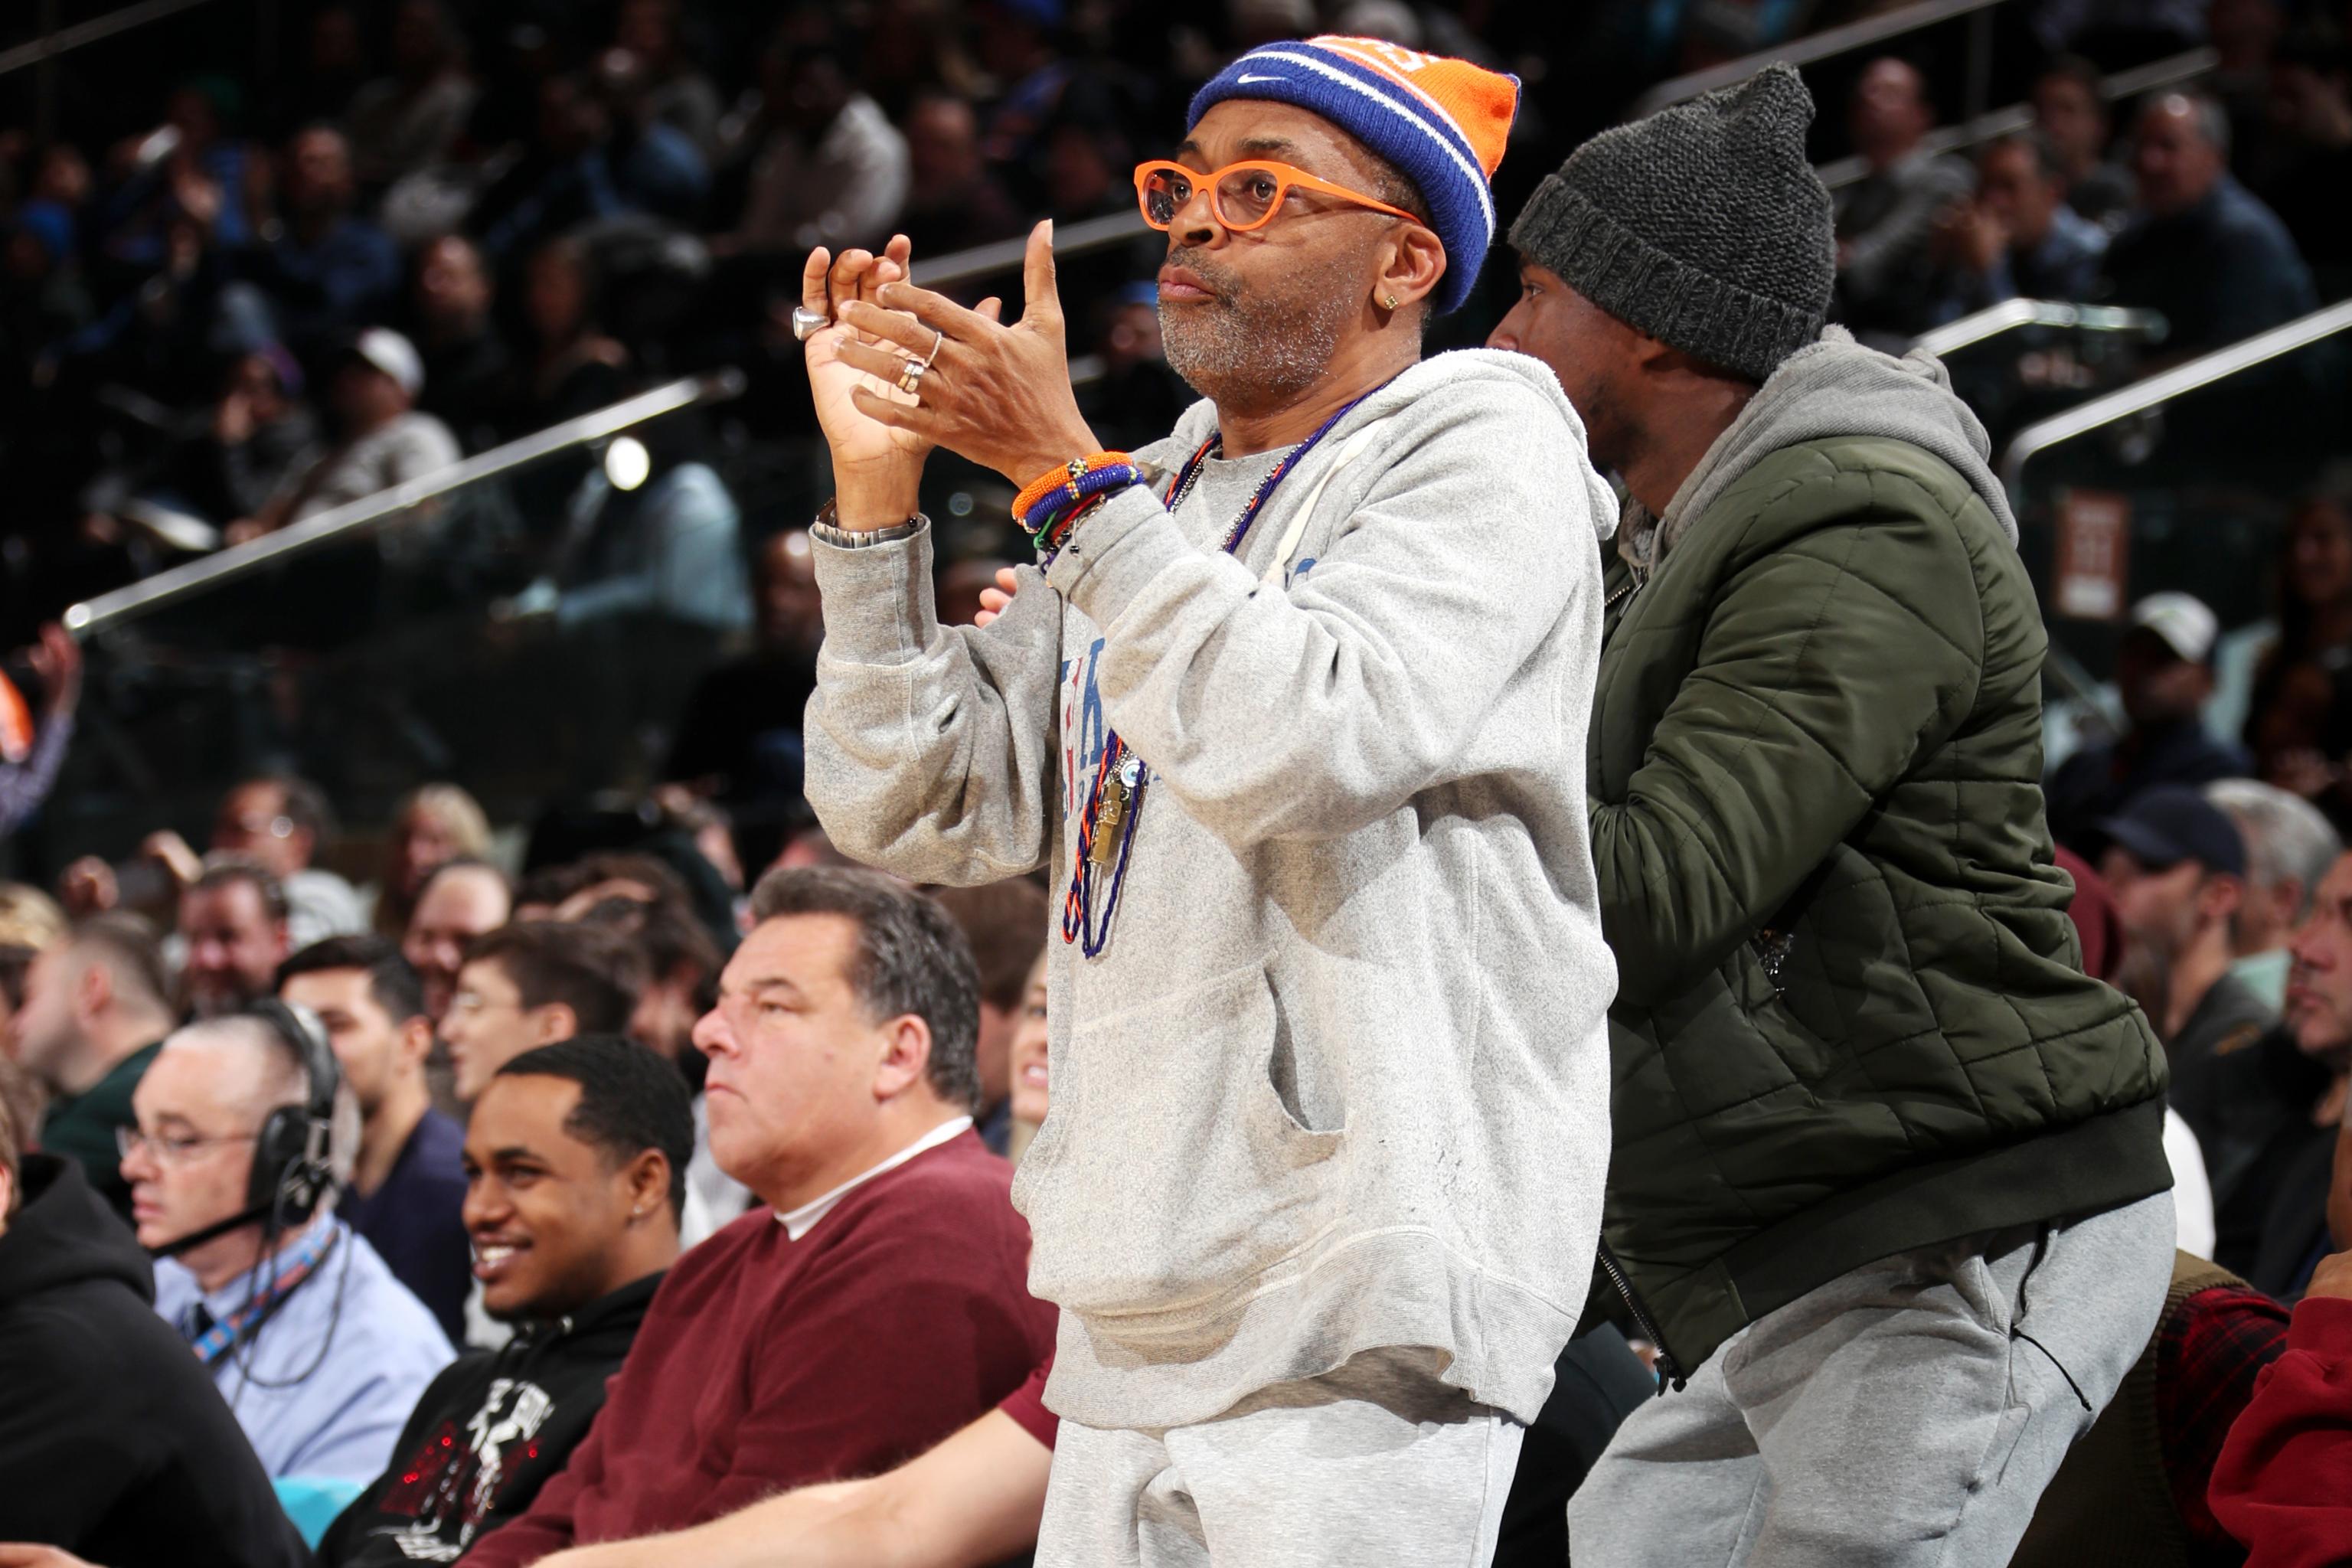 For just $10,000, you can sit next to Spike Lee courtside at a